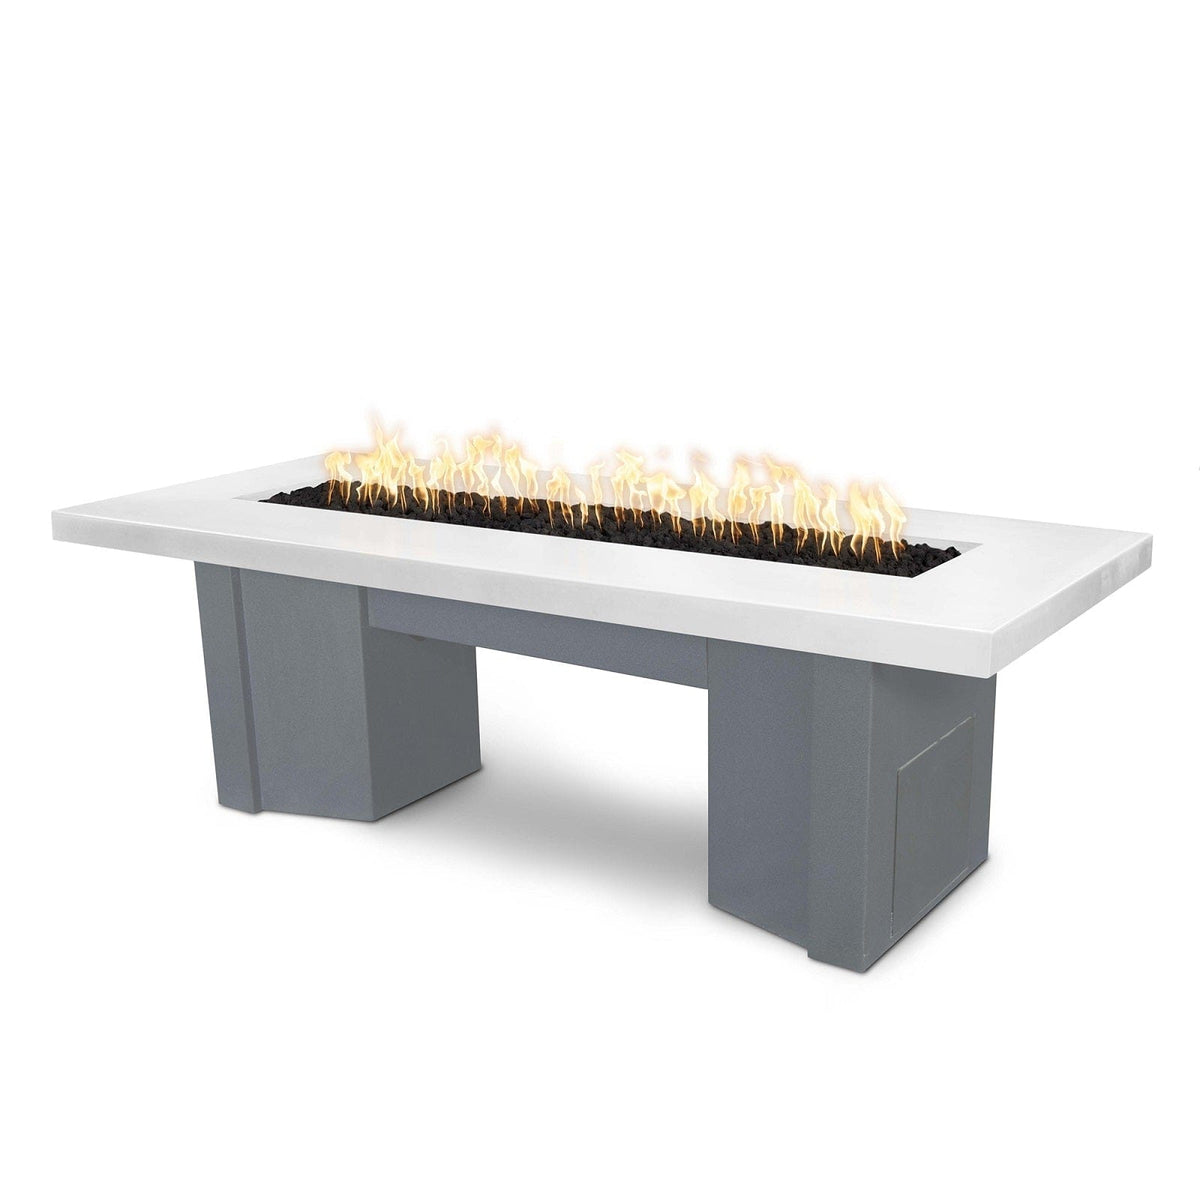 The Outdoor Plus Fire Features Limestone (-LIM) / Gray Powder Coated Steel (-GRY) The Outdoor Plus 60&quot; Alameda Fire Table Smooth Concrete in Liquid Propane - Match Lit / OPT-ALMGFRC60-LP